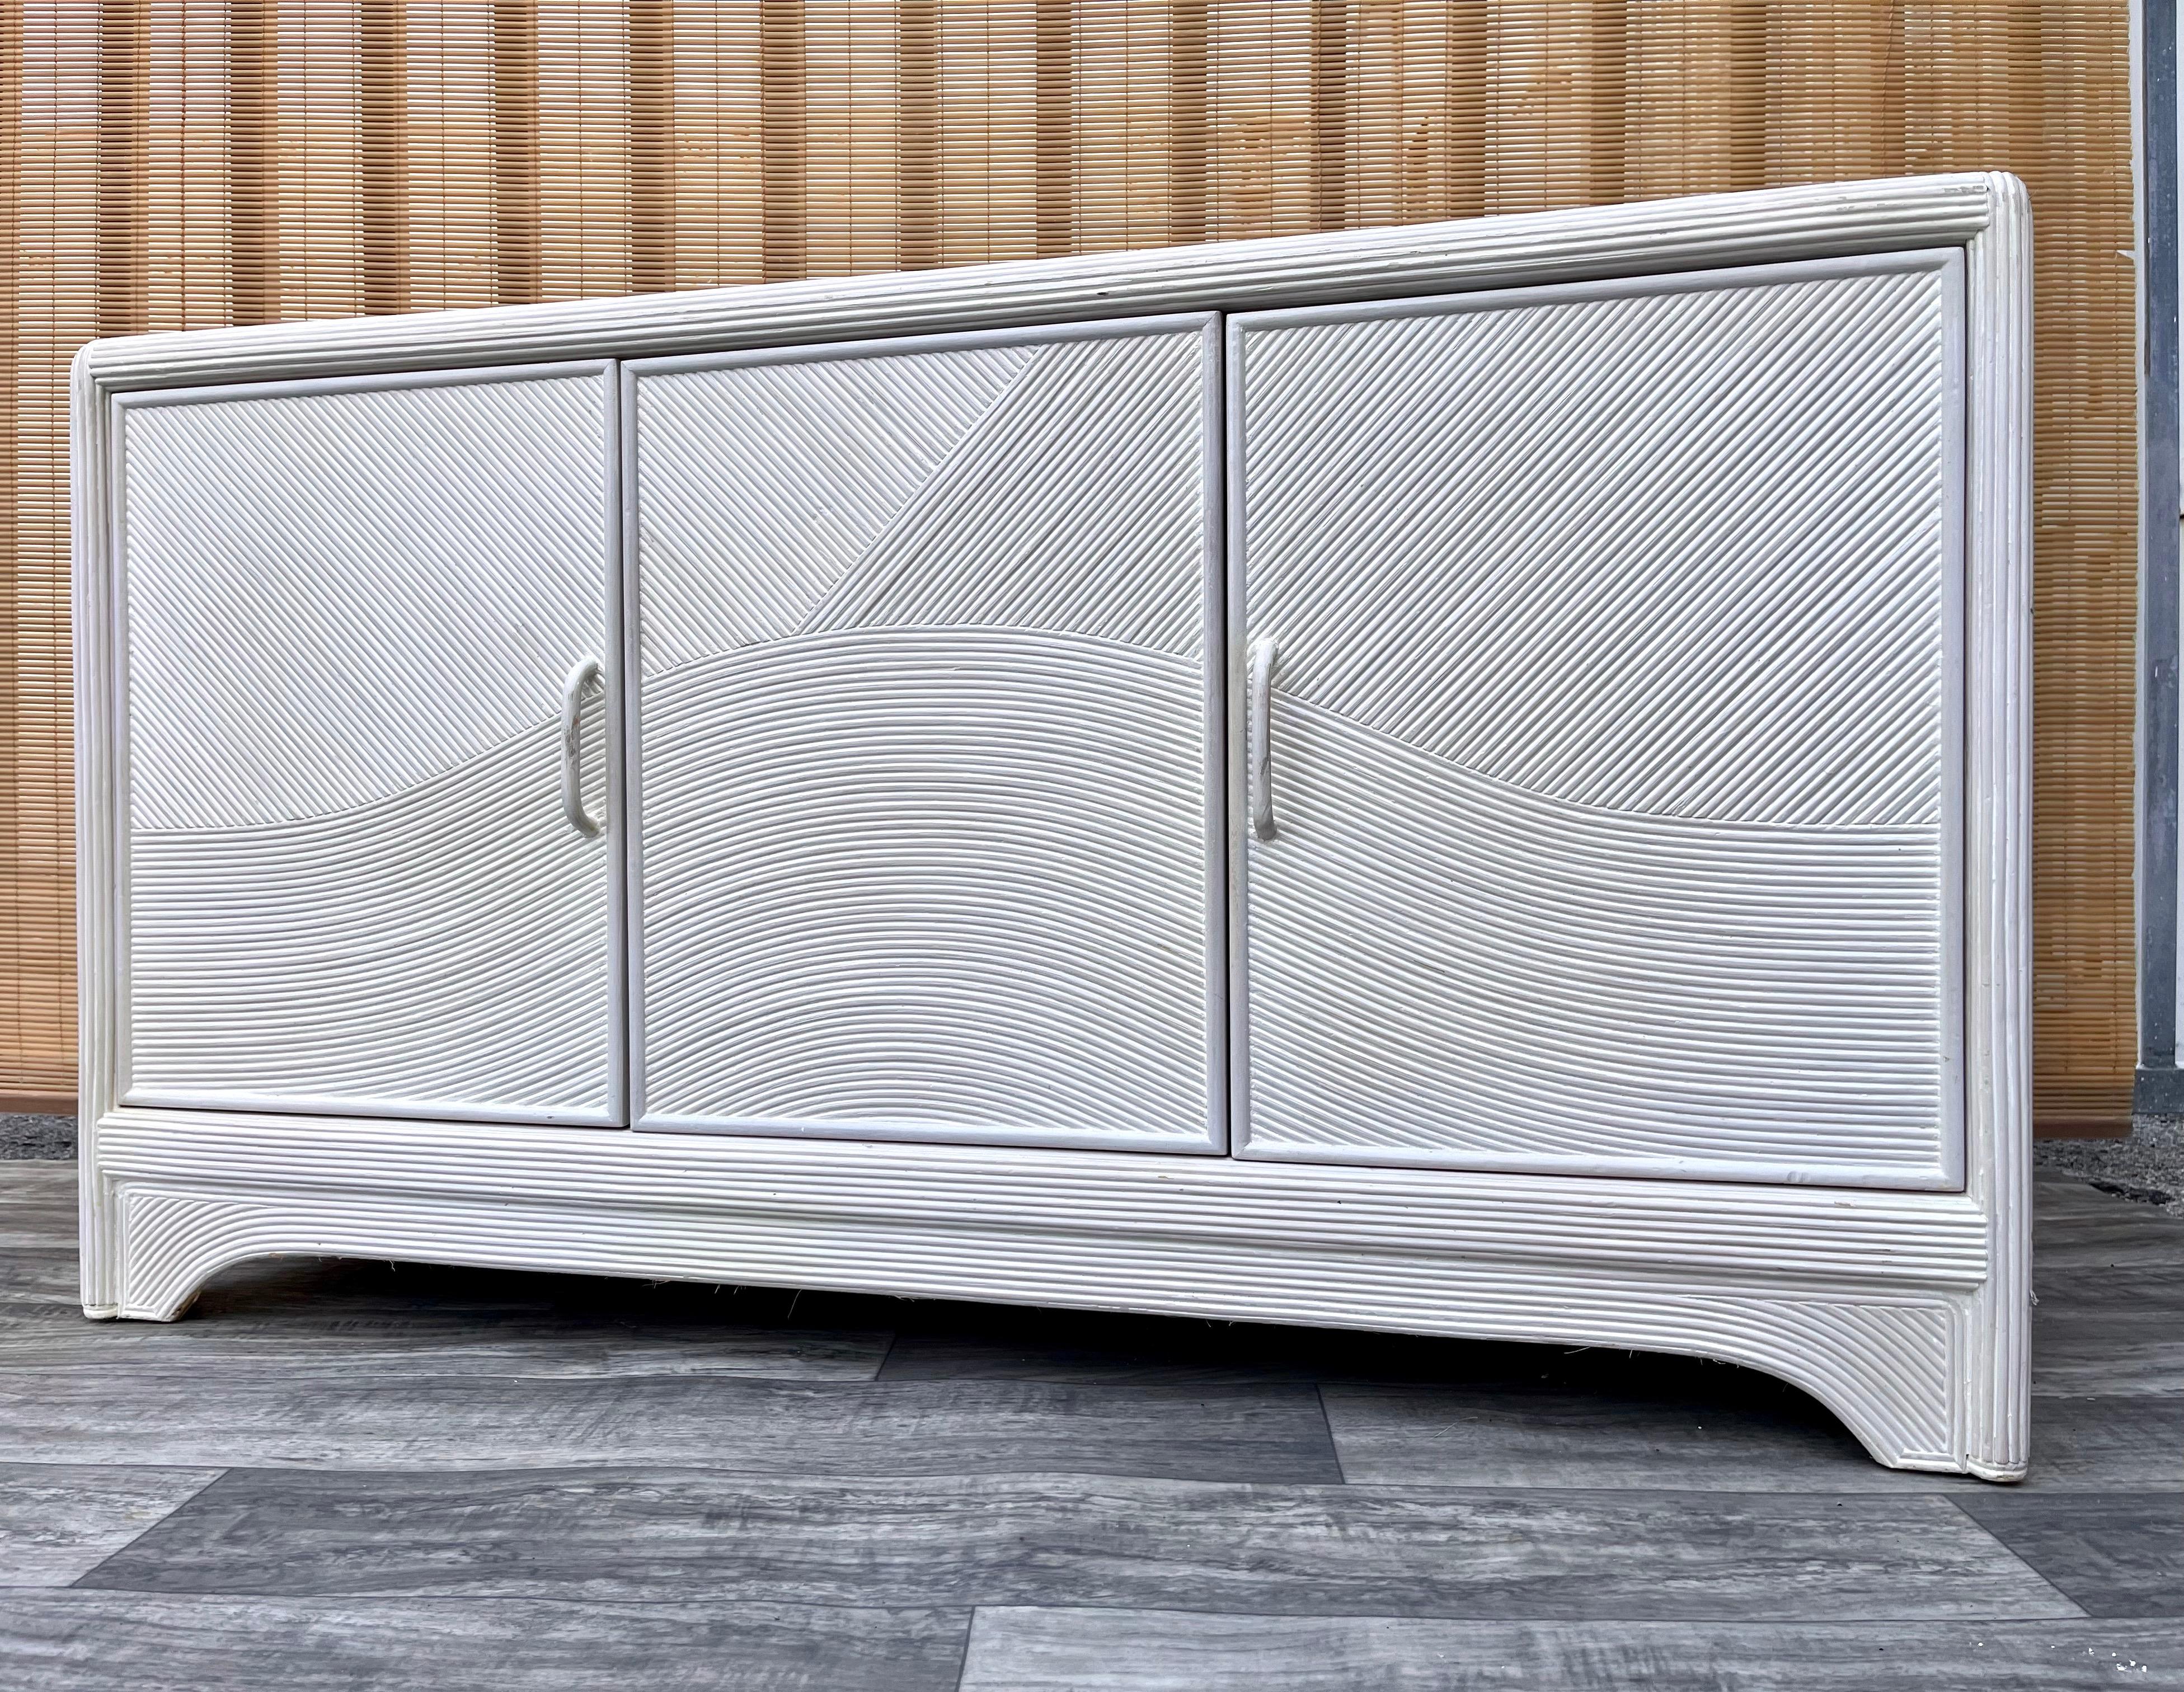 Painted Coastal Style Pencil Reed Sideboard/ Credenza in the Gabriella Crespi Manner